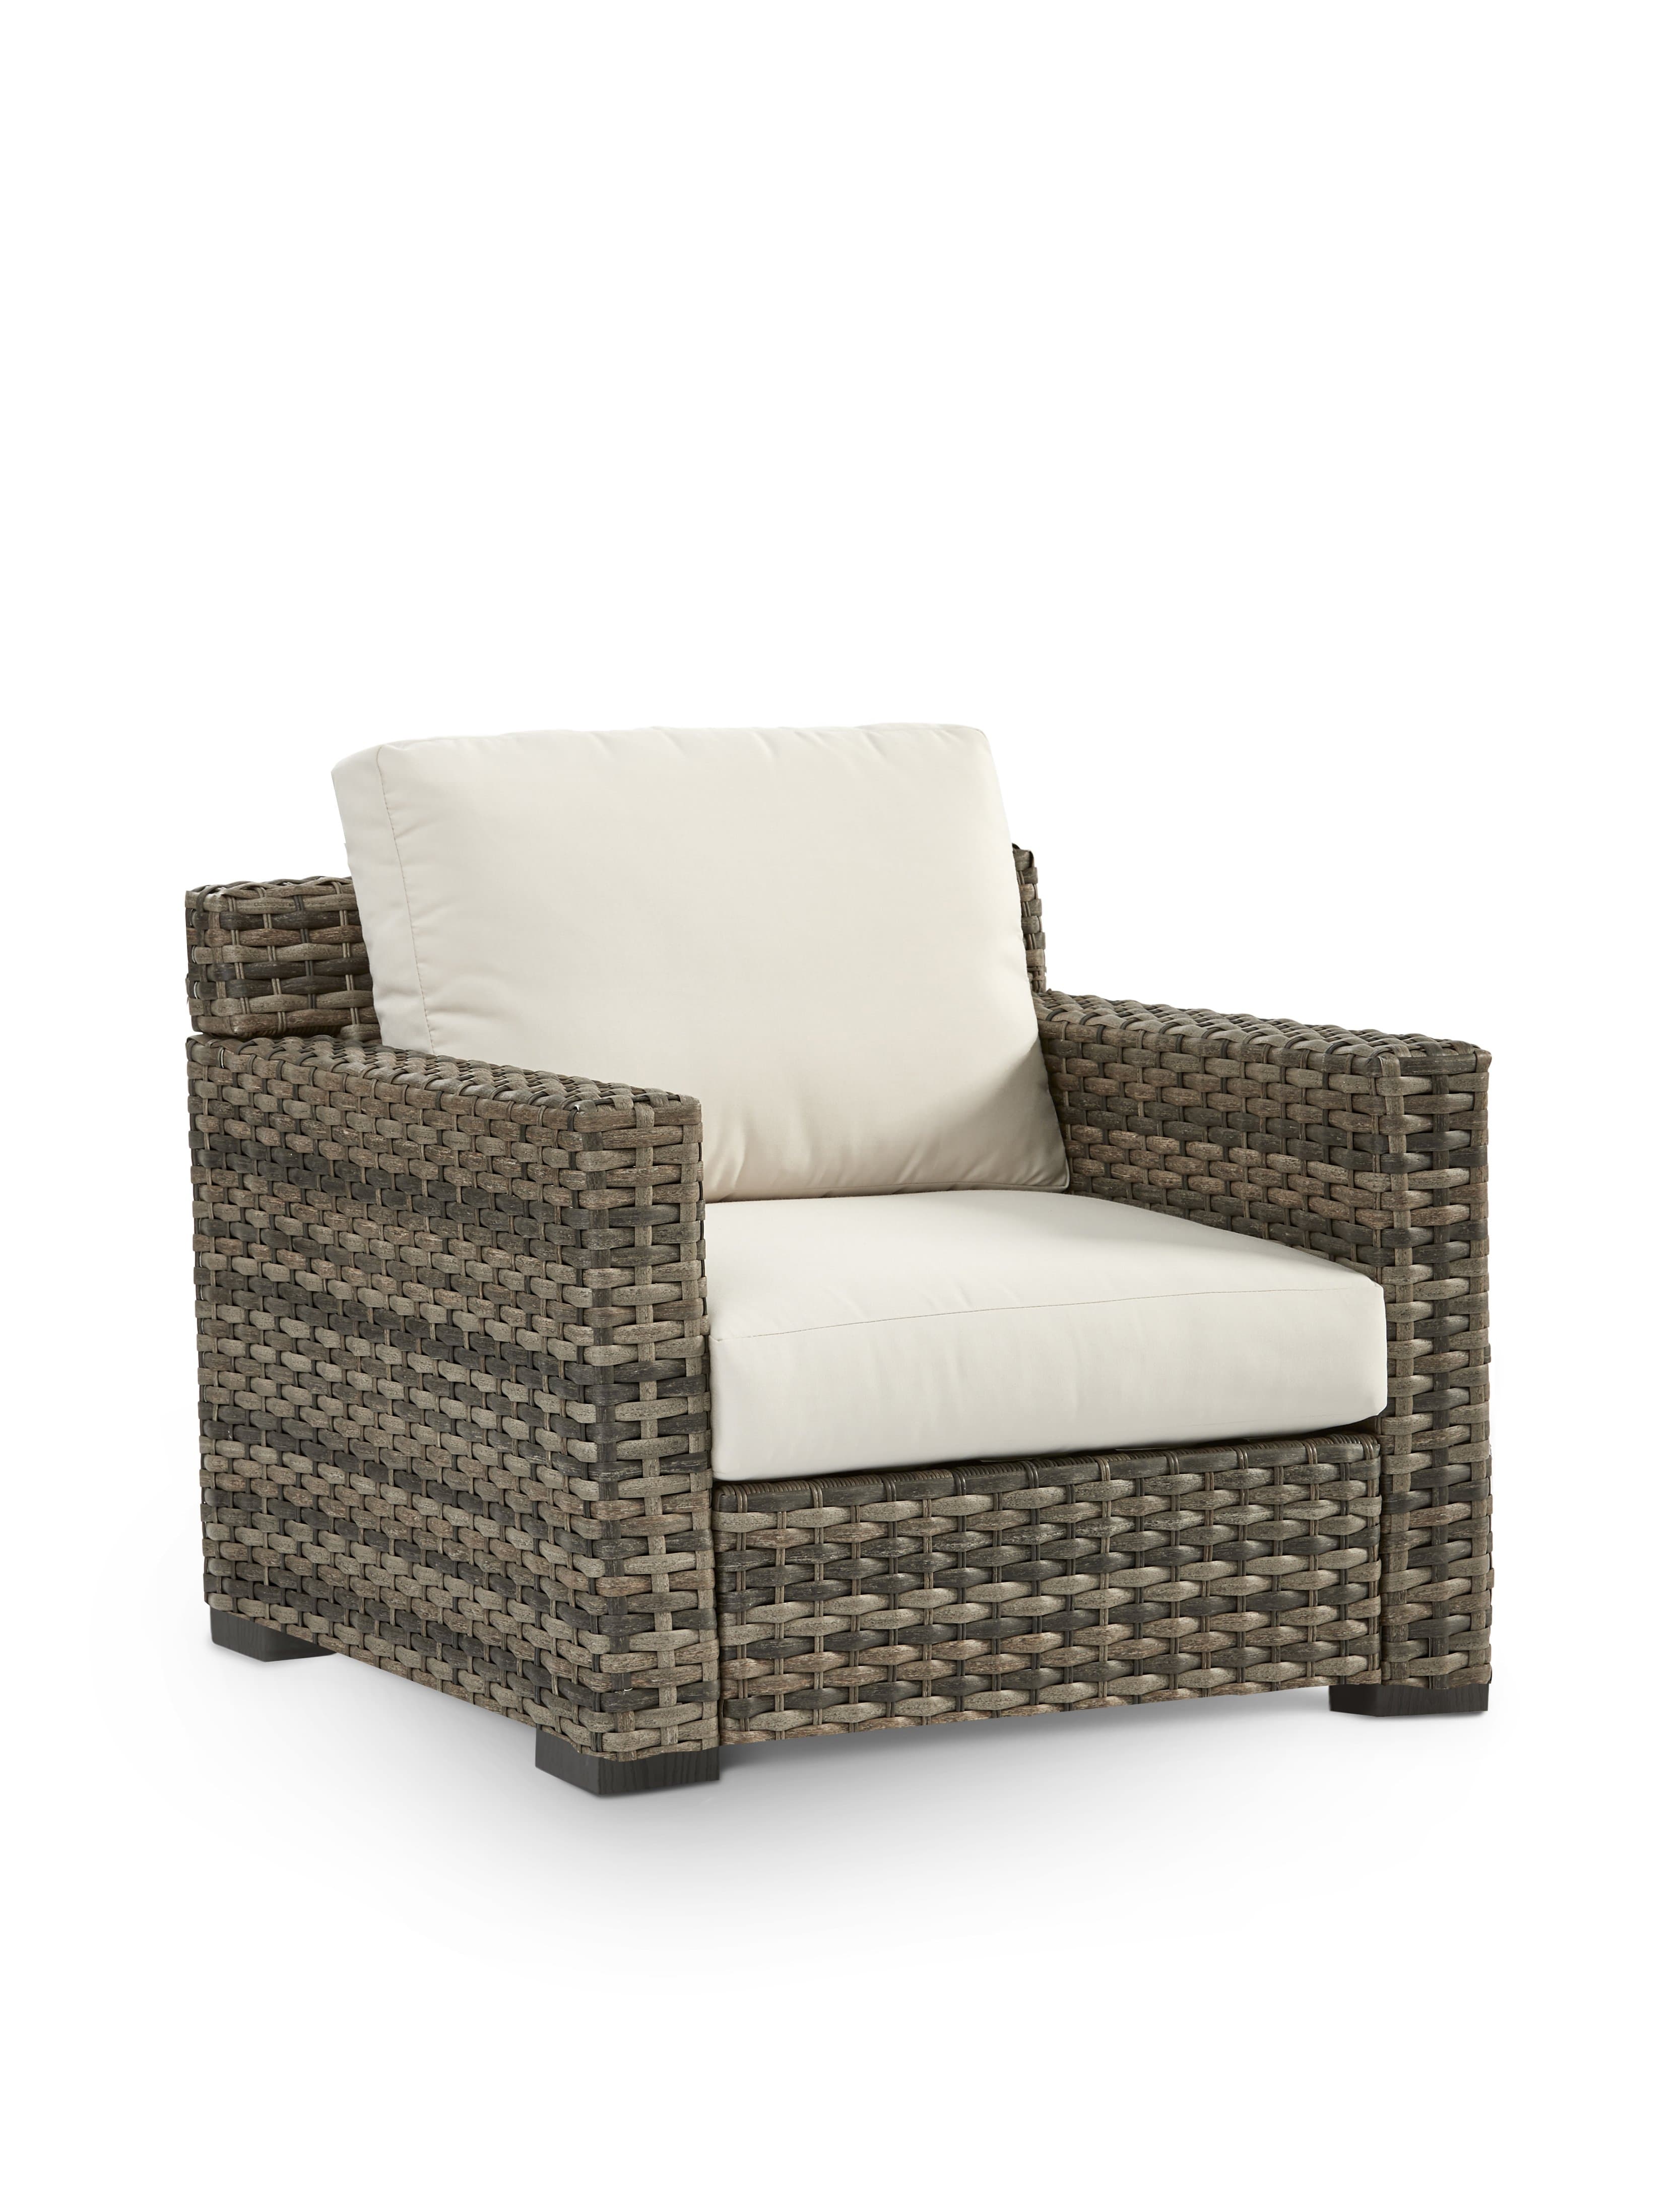 South Sea Outdoor Living Outdoor Furniture New Java Patio Chair With Cushion